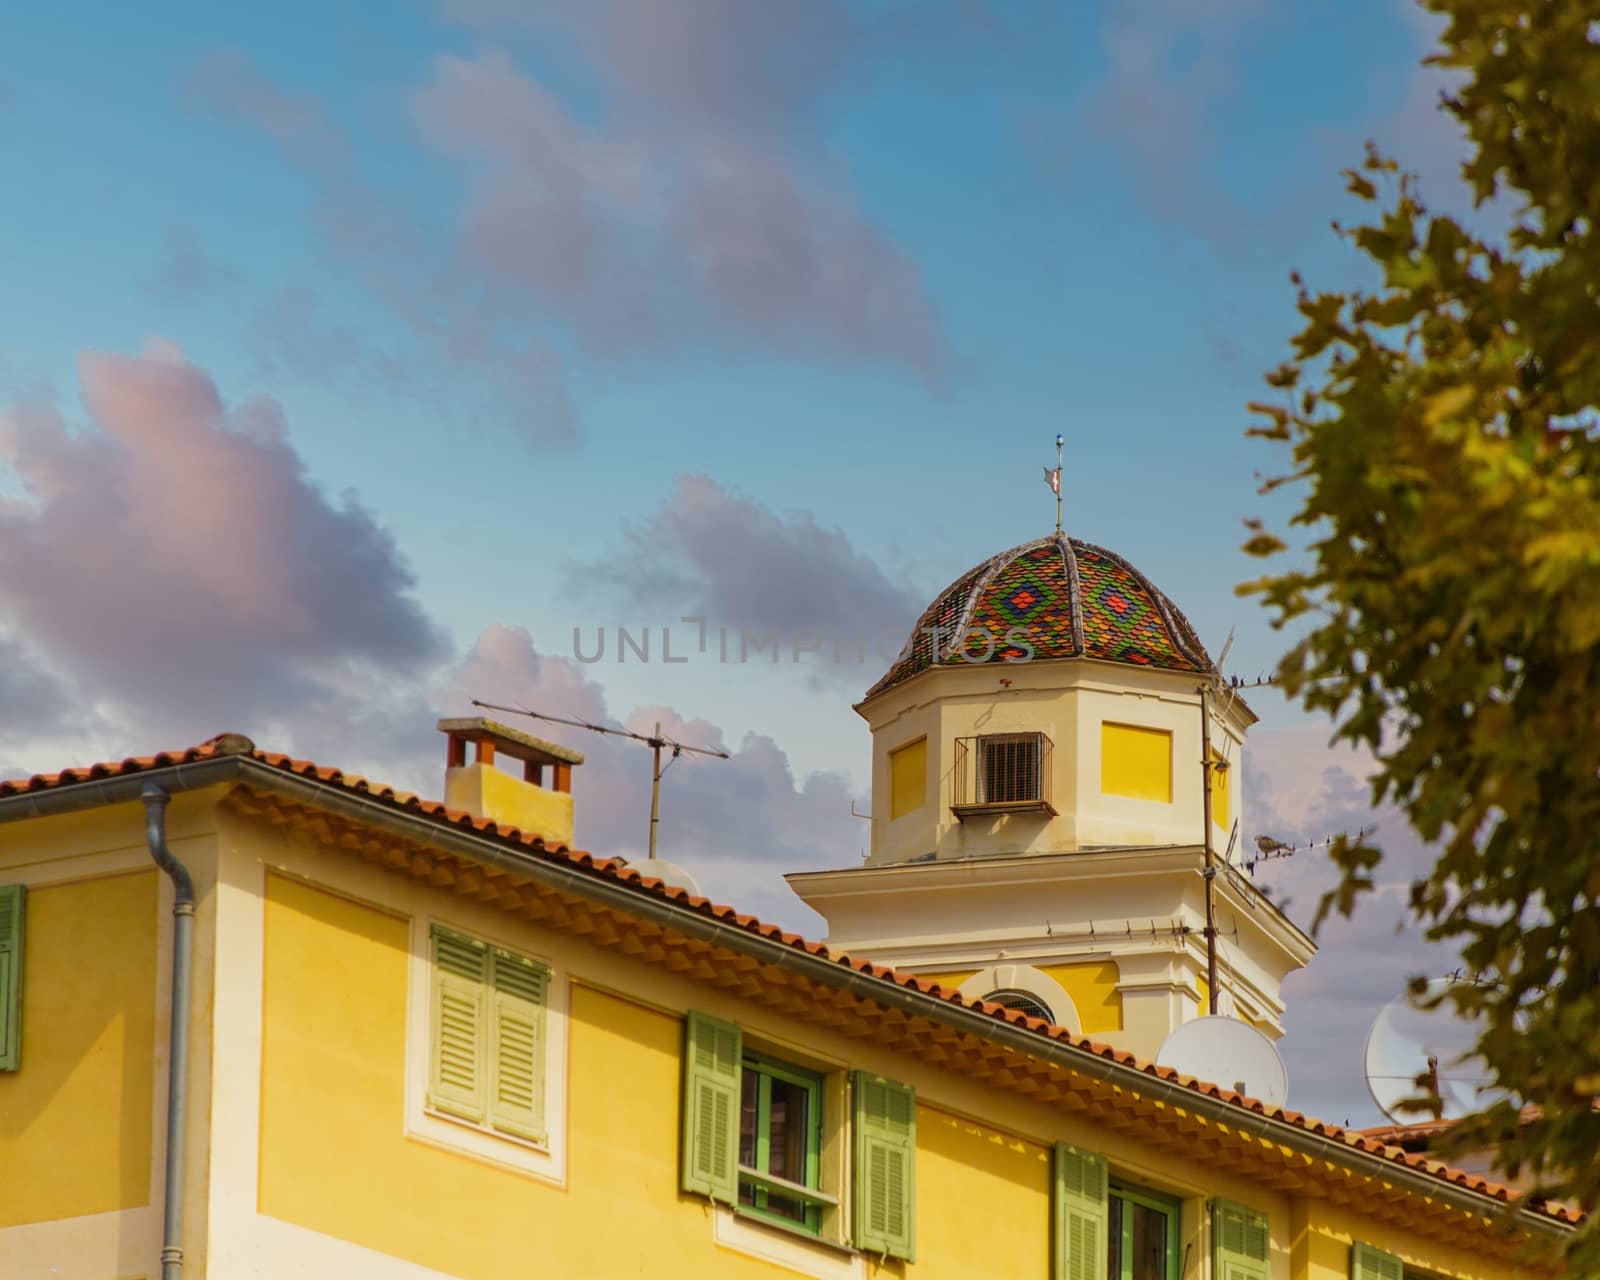 Design of Colorful Rooftiles on Cupola on Yellow Building